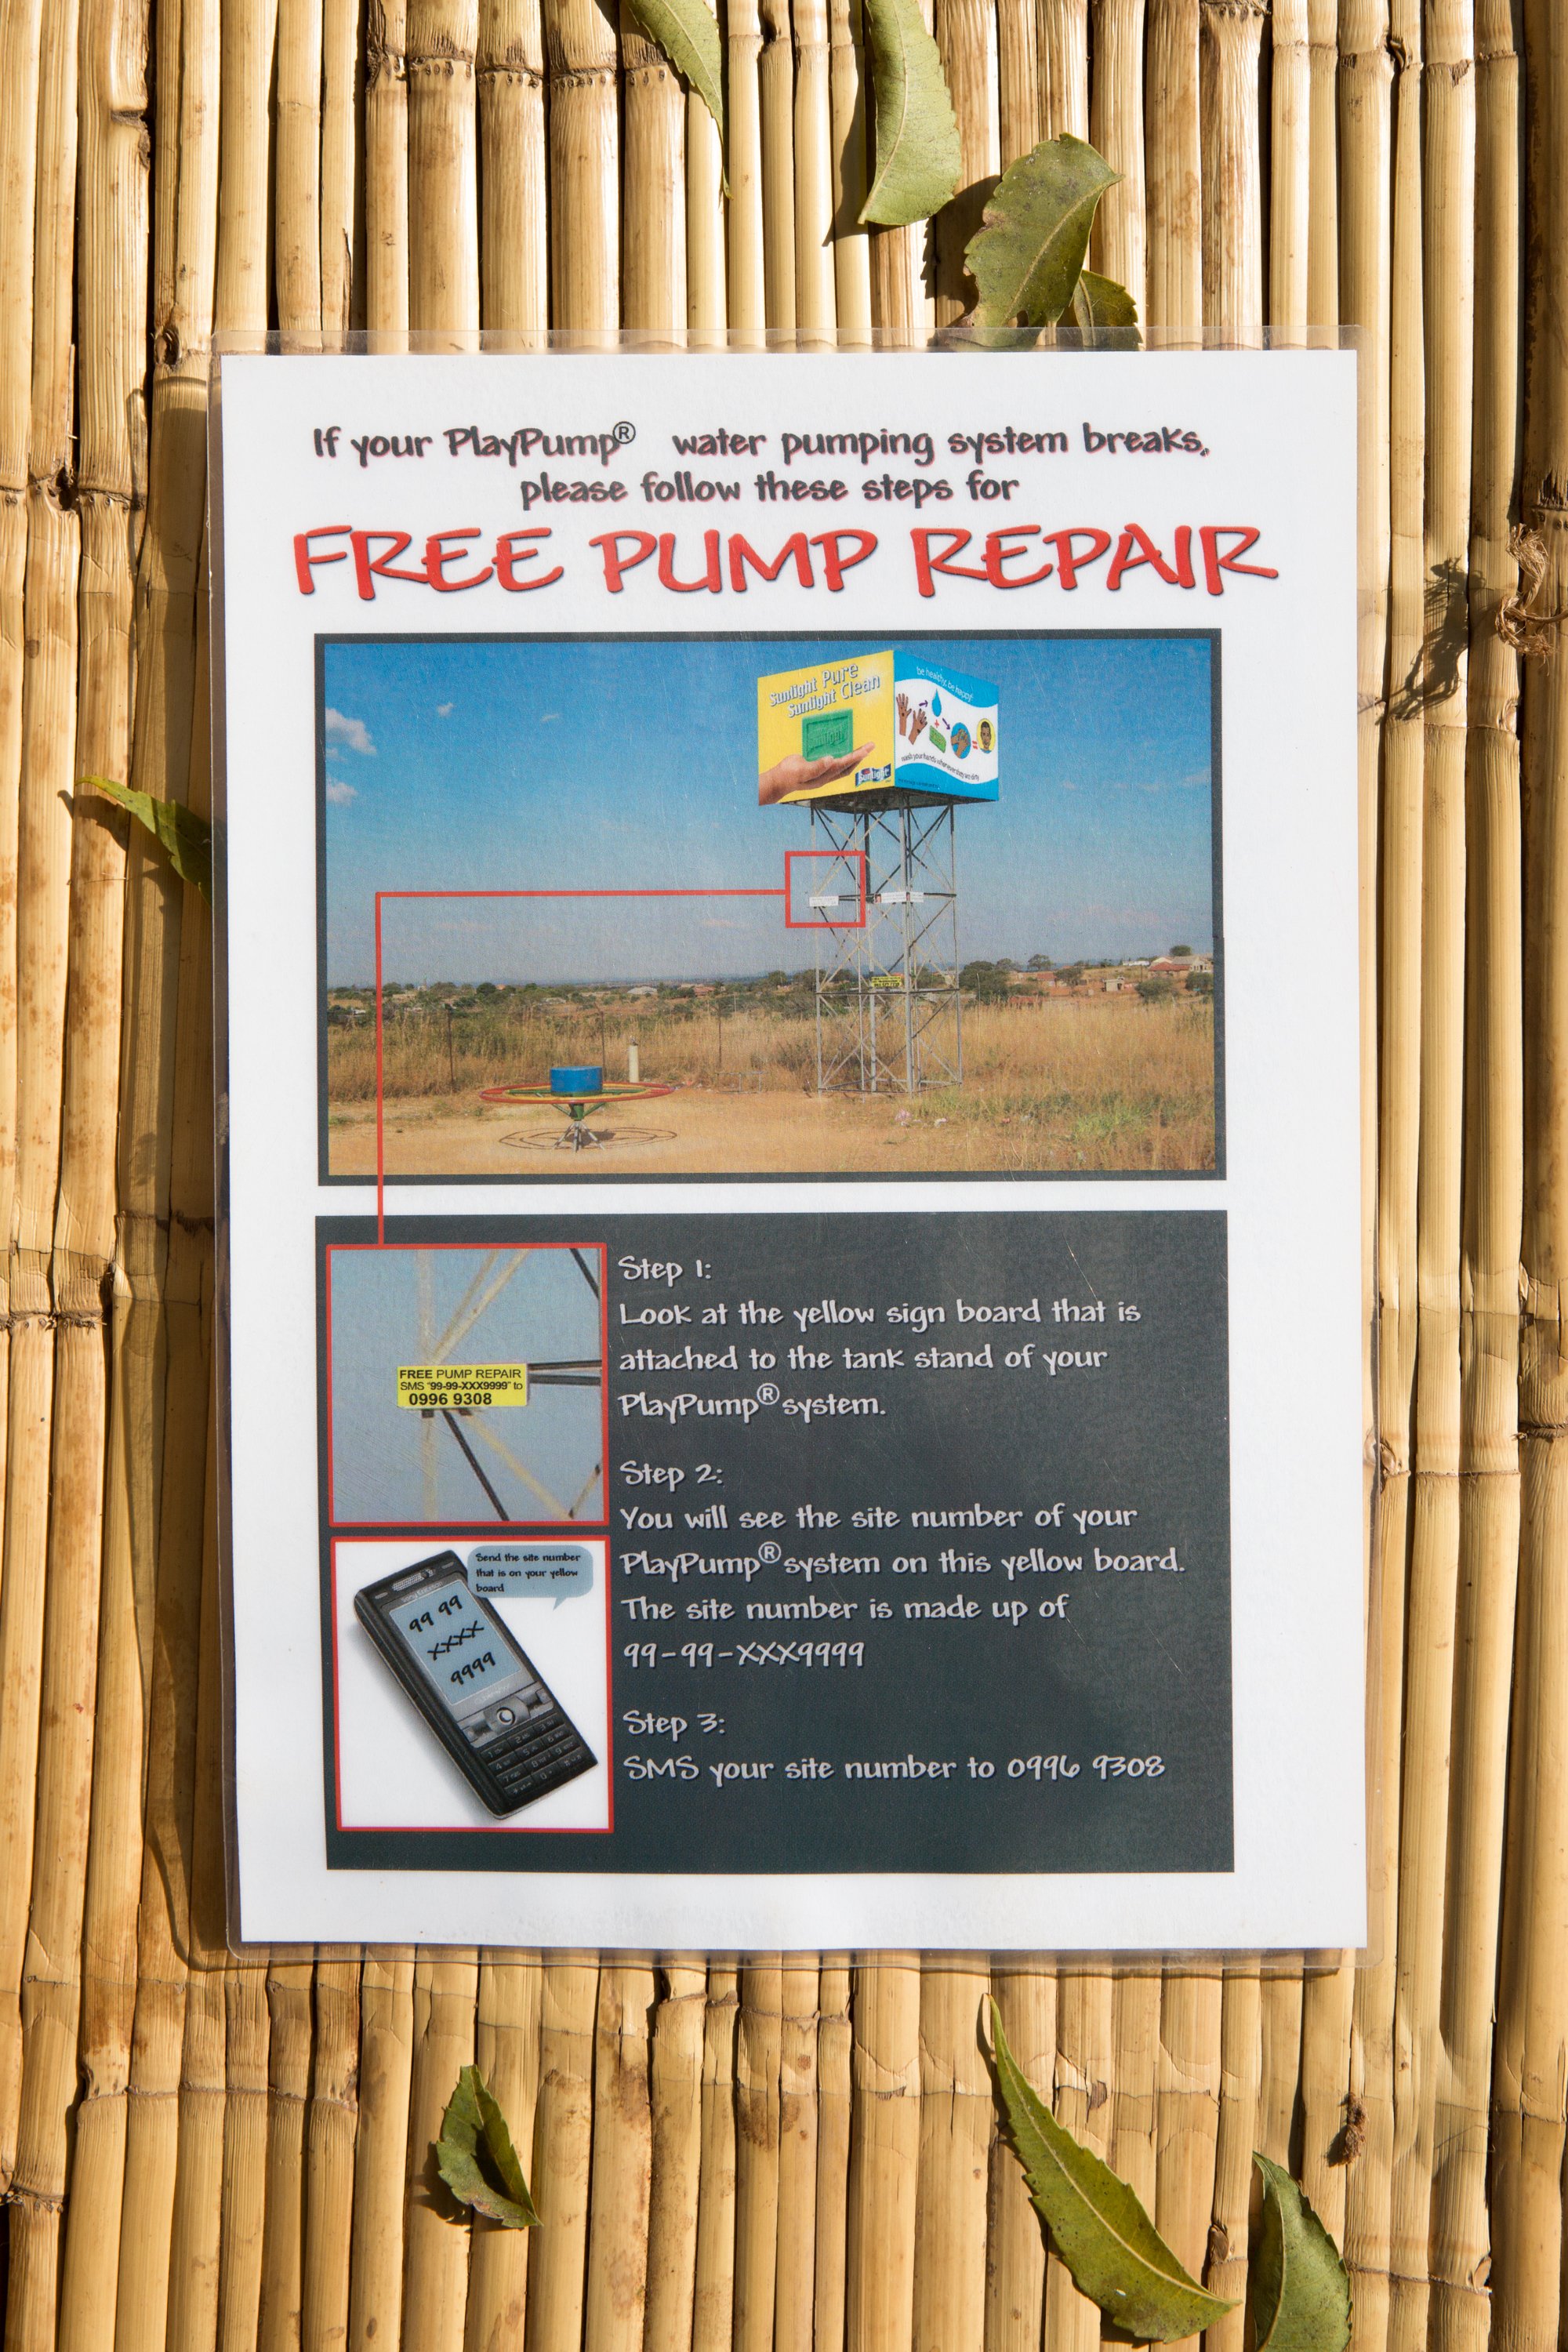  Instruction card for PlayPump repairs. Nkudzi Primary School in Zilipaine, Chikhwawa District, Malawi. Photographed June 8, 2015. This card was left behind with teachers at the school, who followed these instructions to report their broken PlayPump.